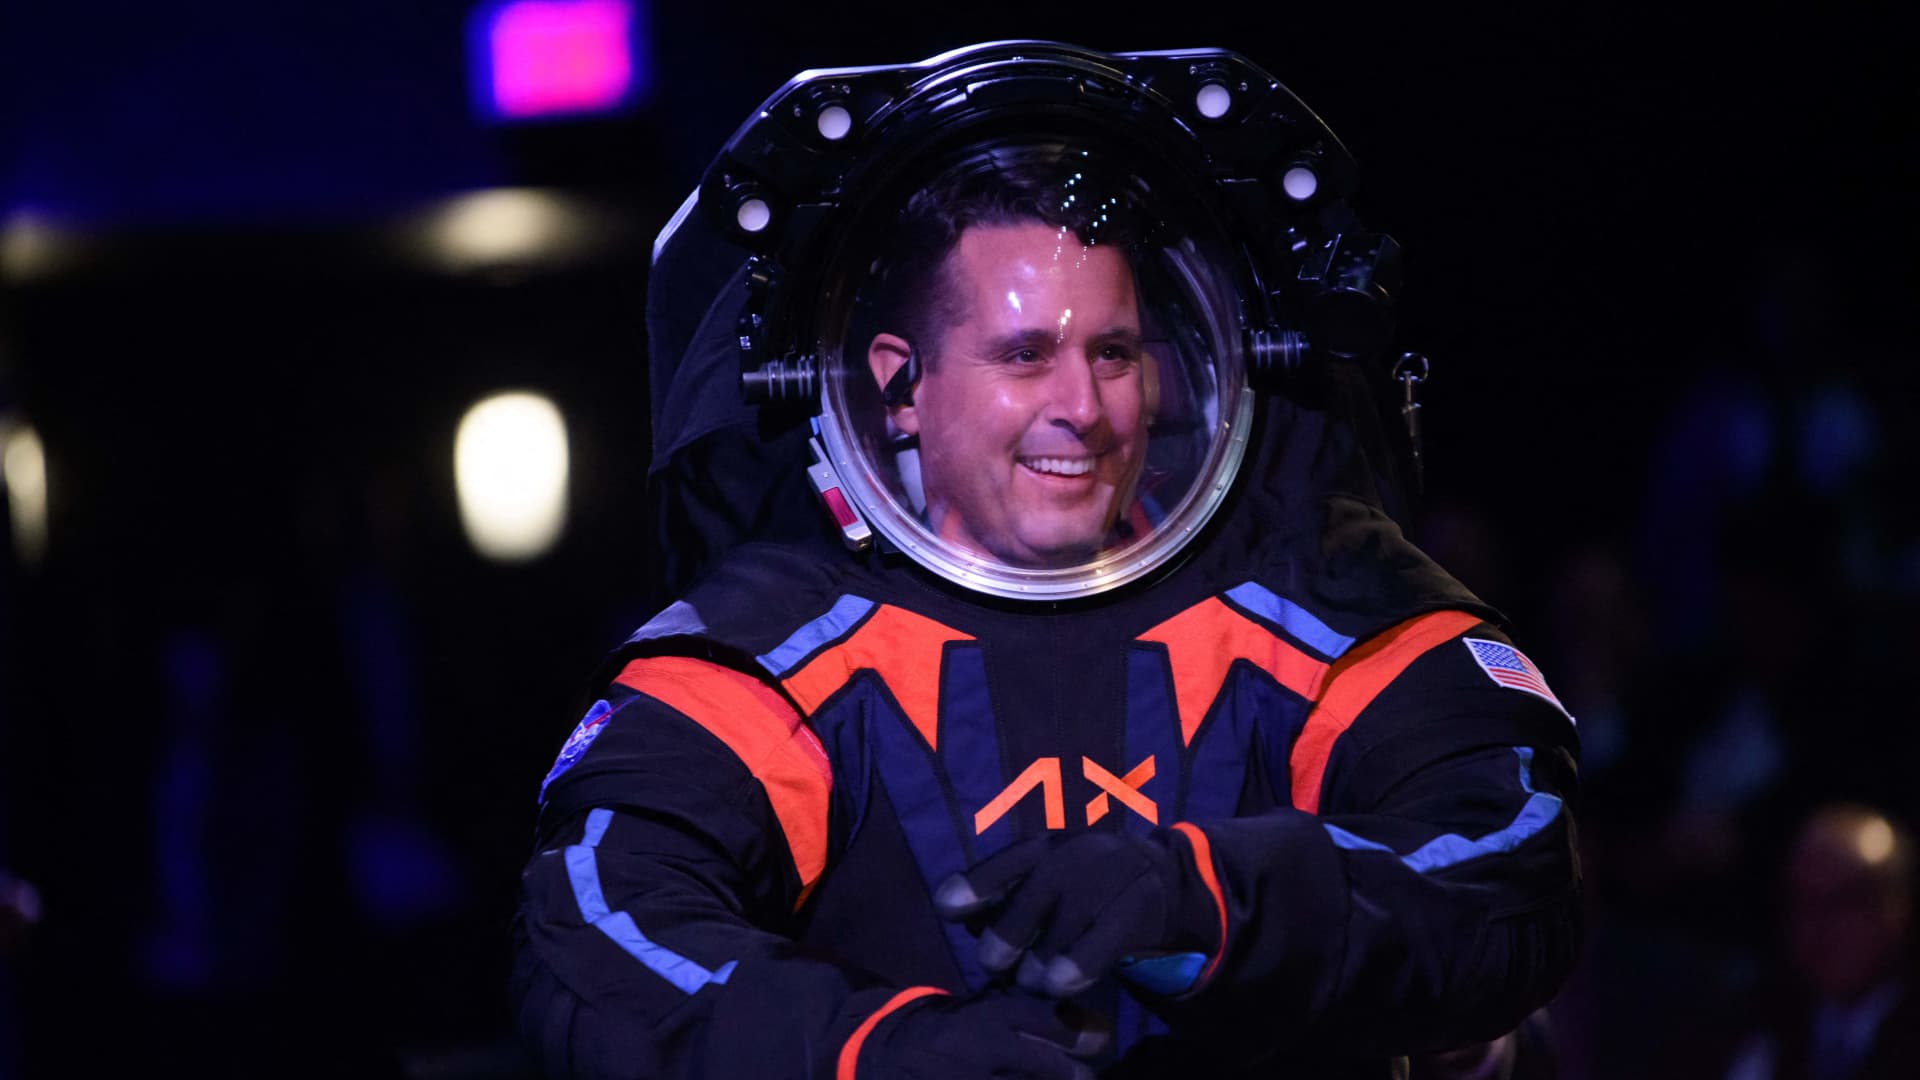 Axiom unveils spacesuits for NASA’s upcoming Artemis moon missions